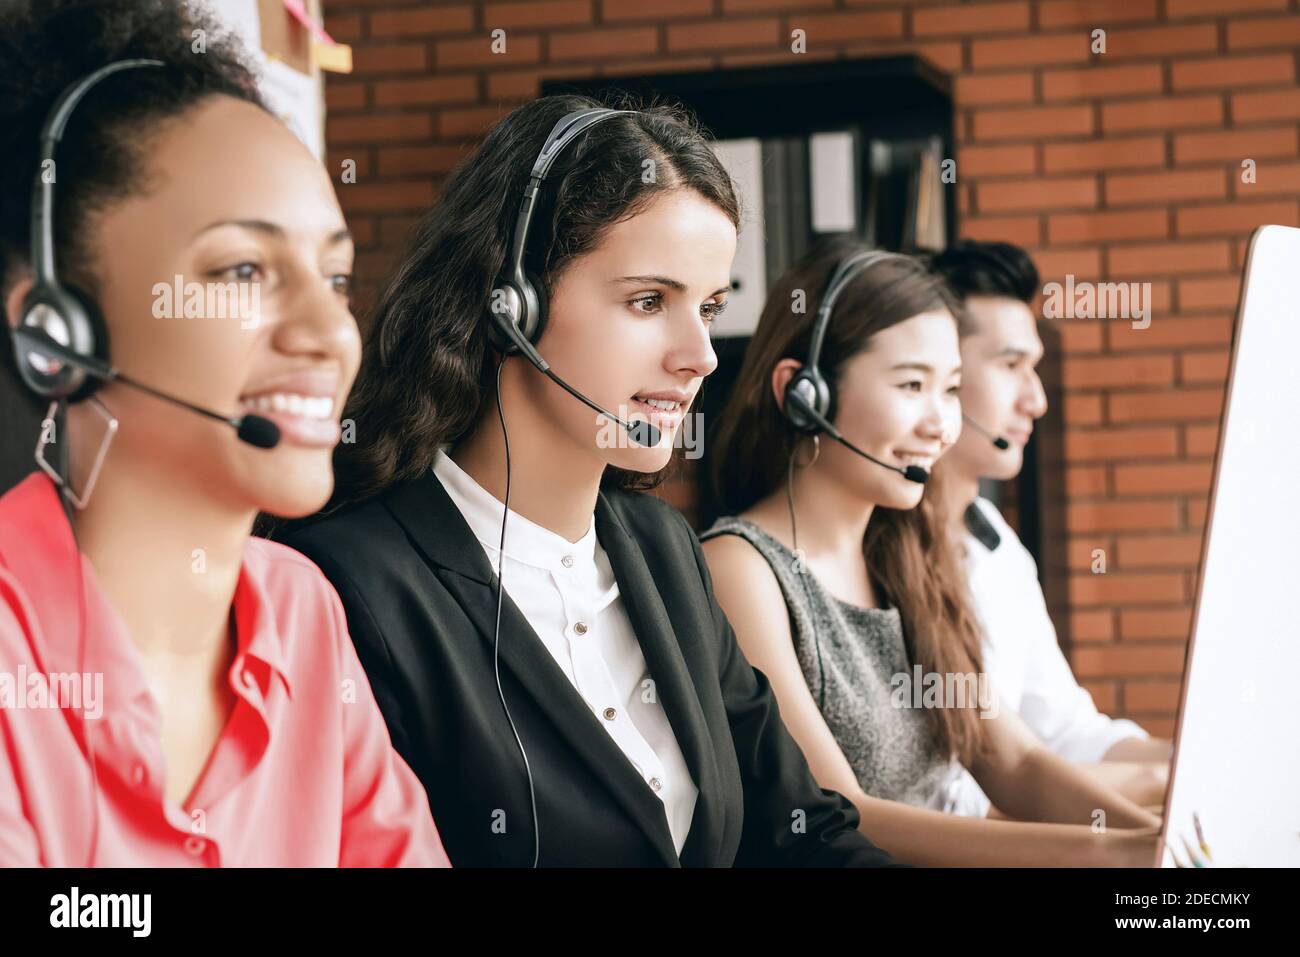 International call center telemarketing customer service agent team working in the office Stock Photo